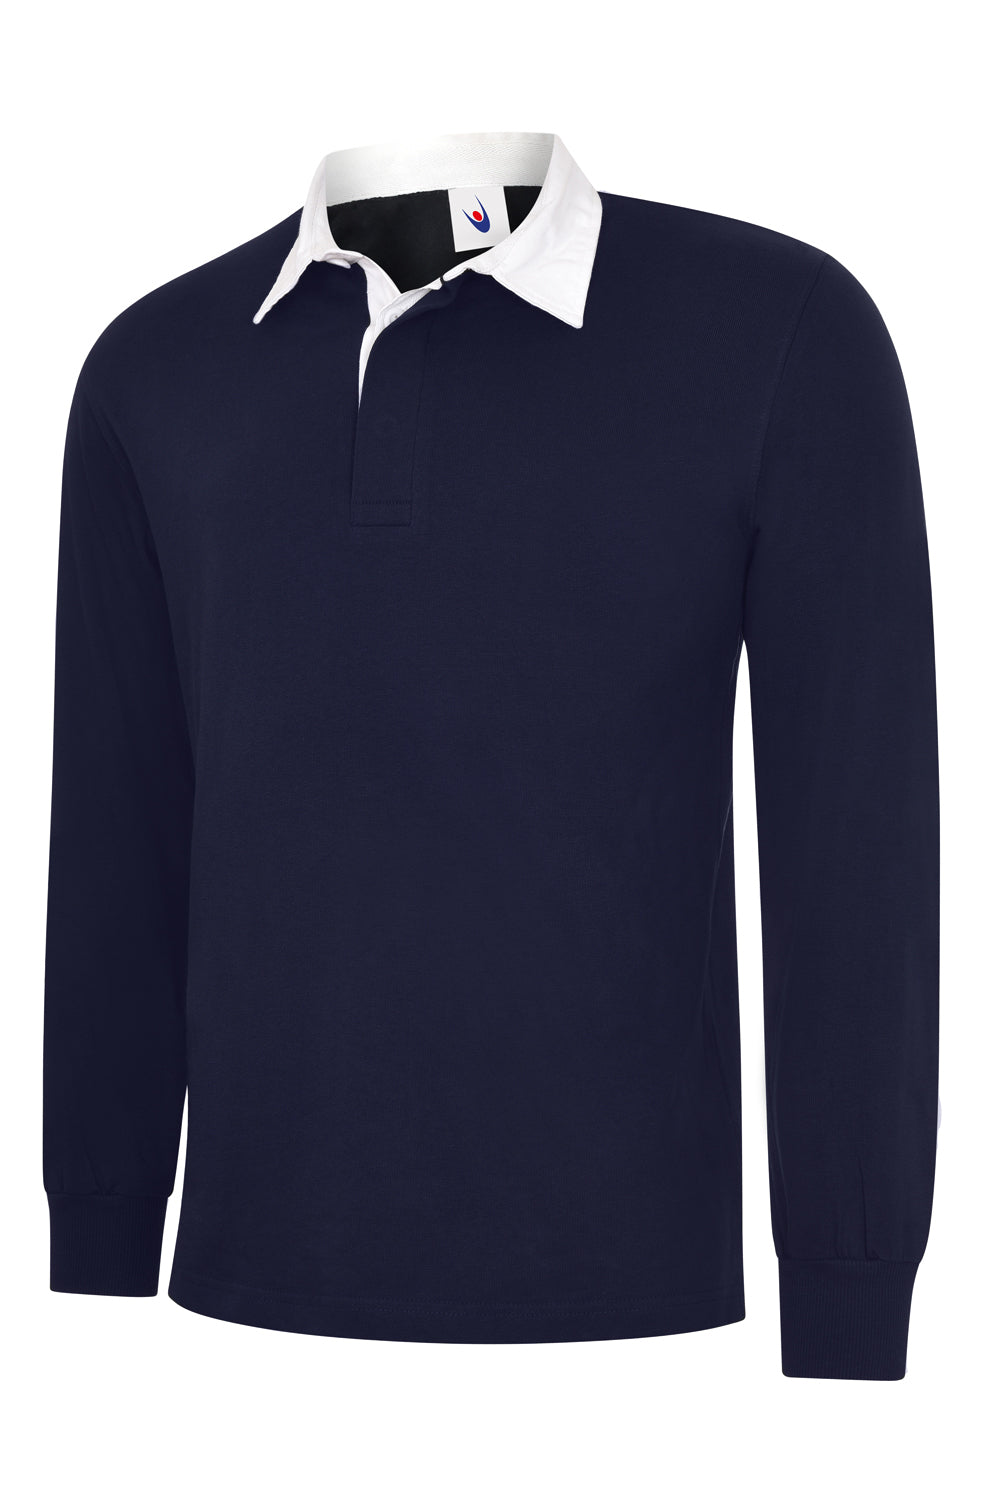 classic_rugby_shirt_navy